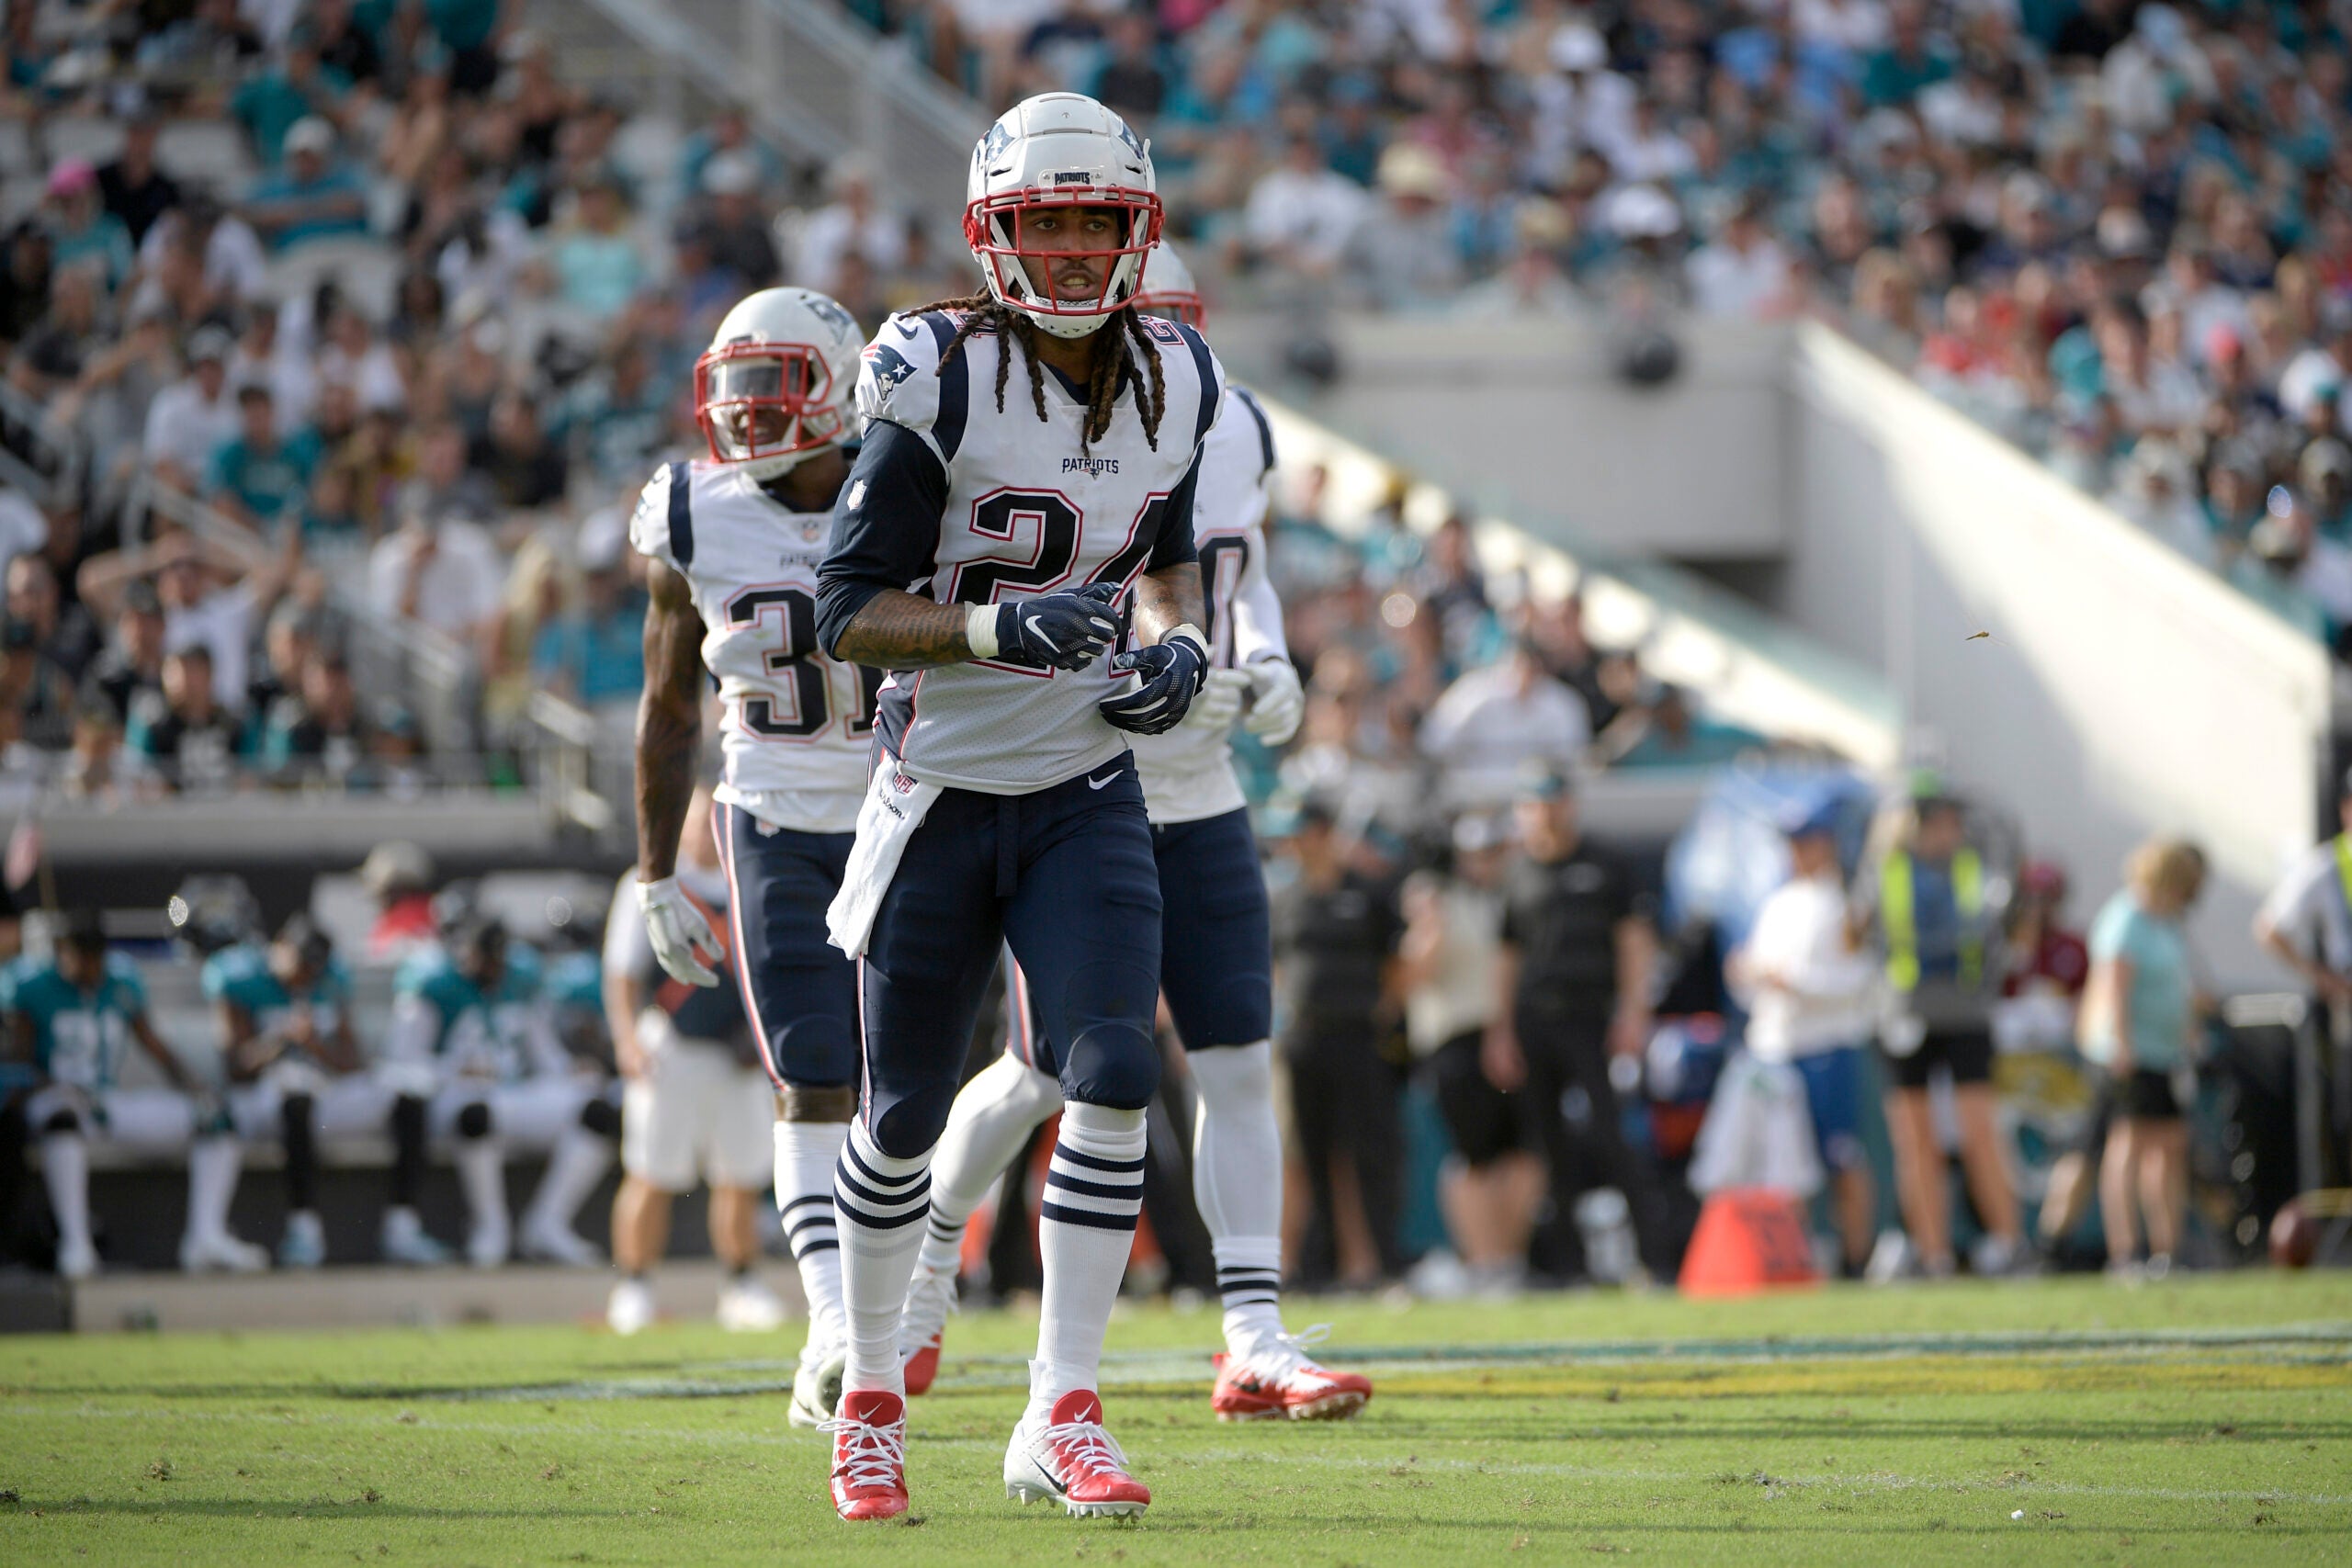 Tom Brady earns 14th Pro Bowl selection as Patriots only send two